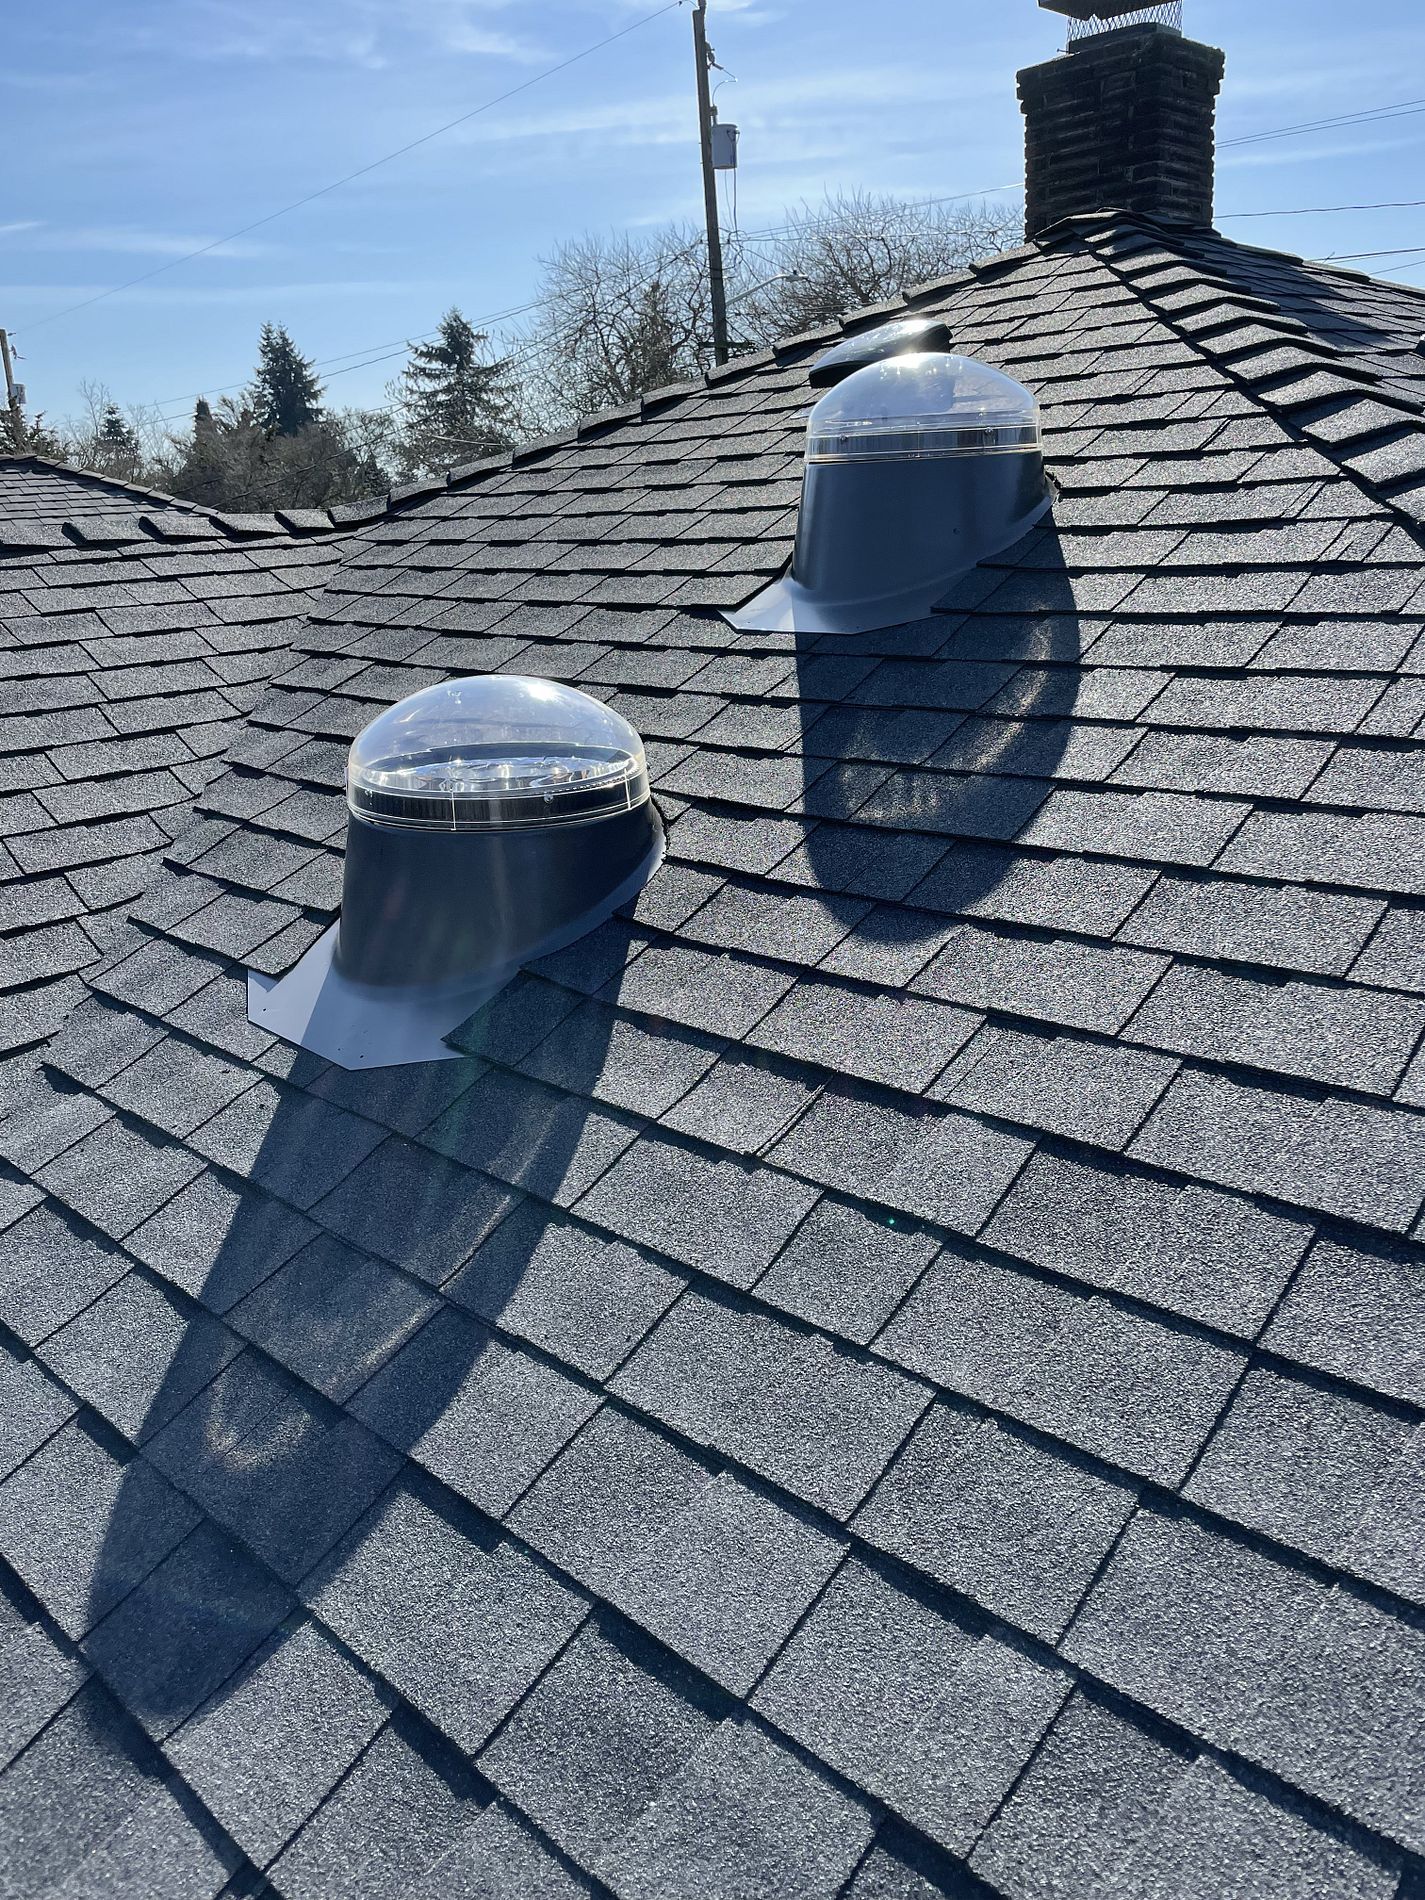 Add Beauty, Comfort, & Fresh Air to your Home with a New Skylight. Learn More! Free Consultation. No Leak Promise. 10-Year Skylight Warranty. Local VELUX Expert. Types: Electric Skylights, Fresh Air Skylights, Solar Powered Skylights